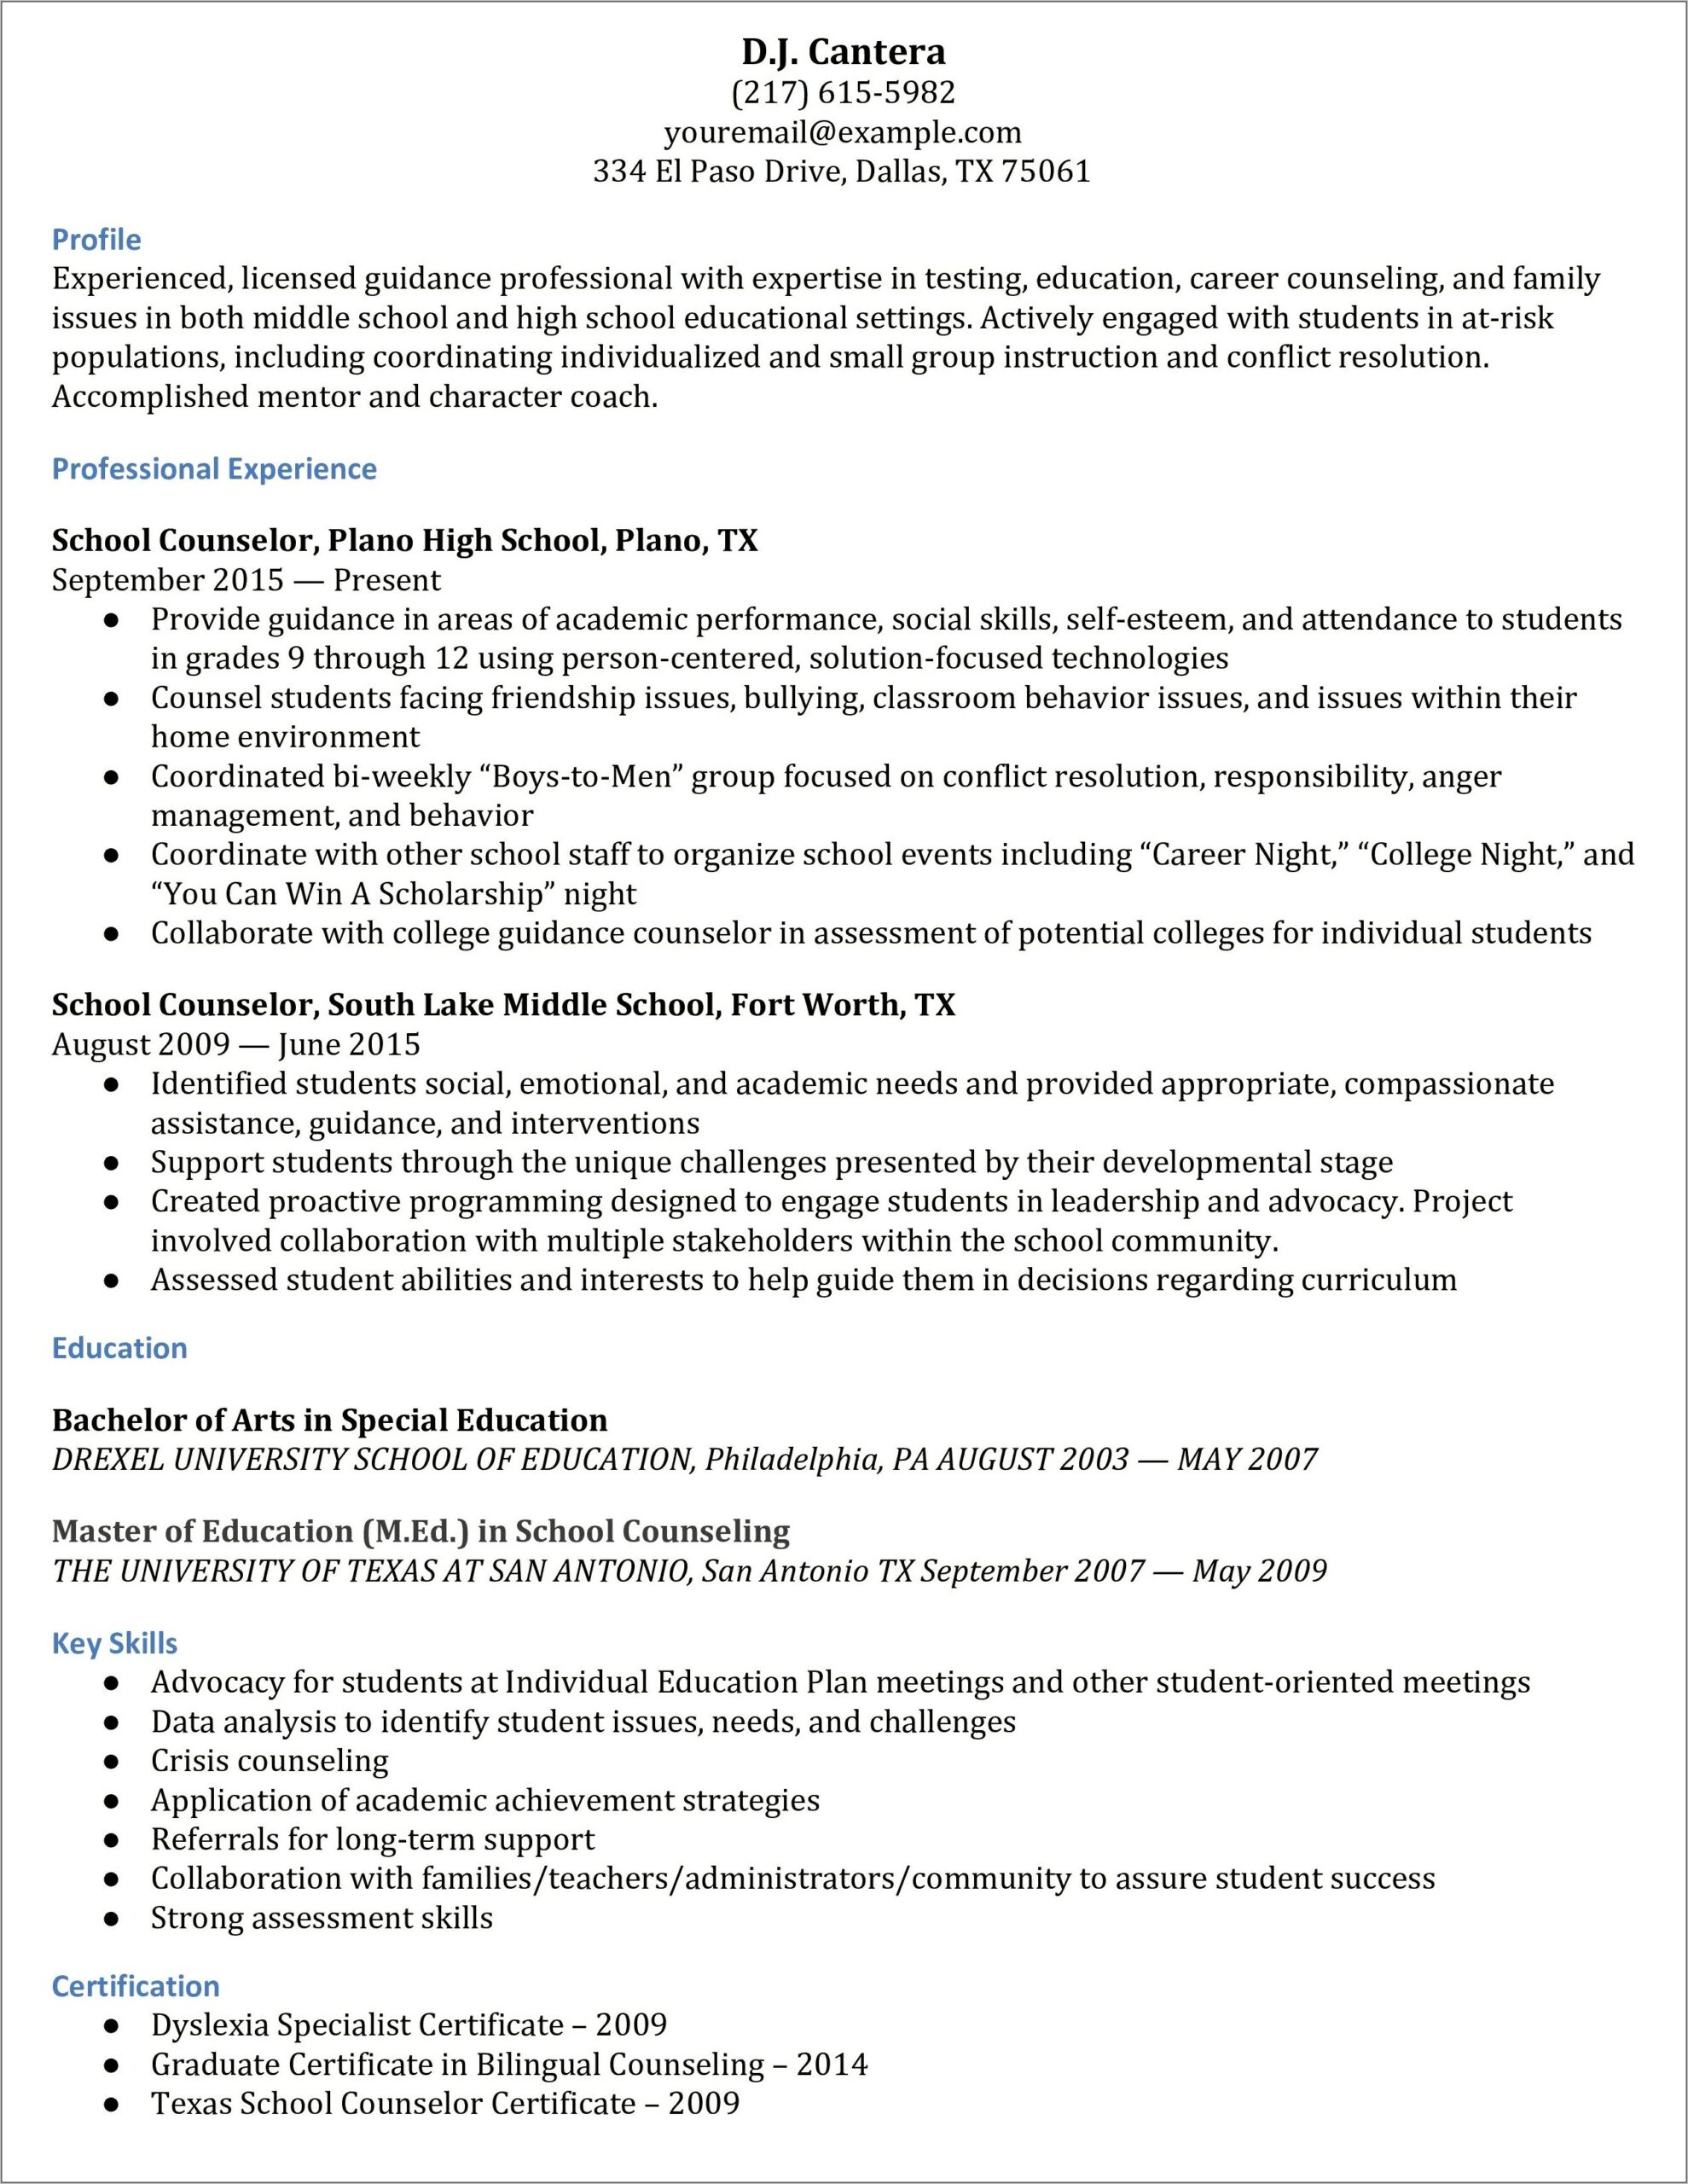 Sample Resume Outline For Counseling Position